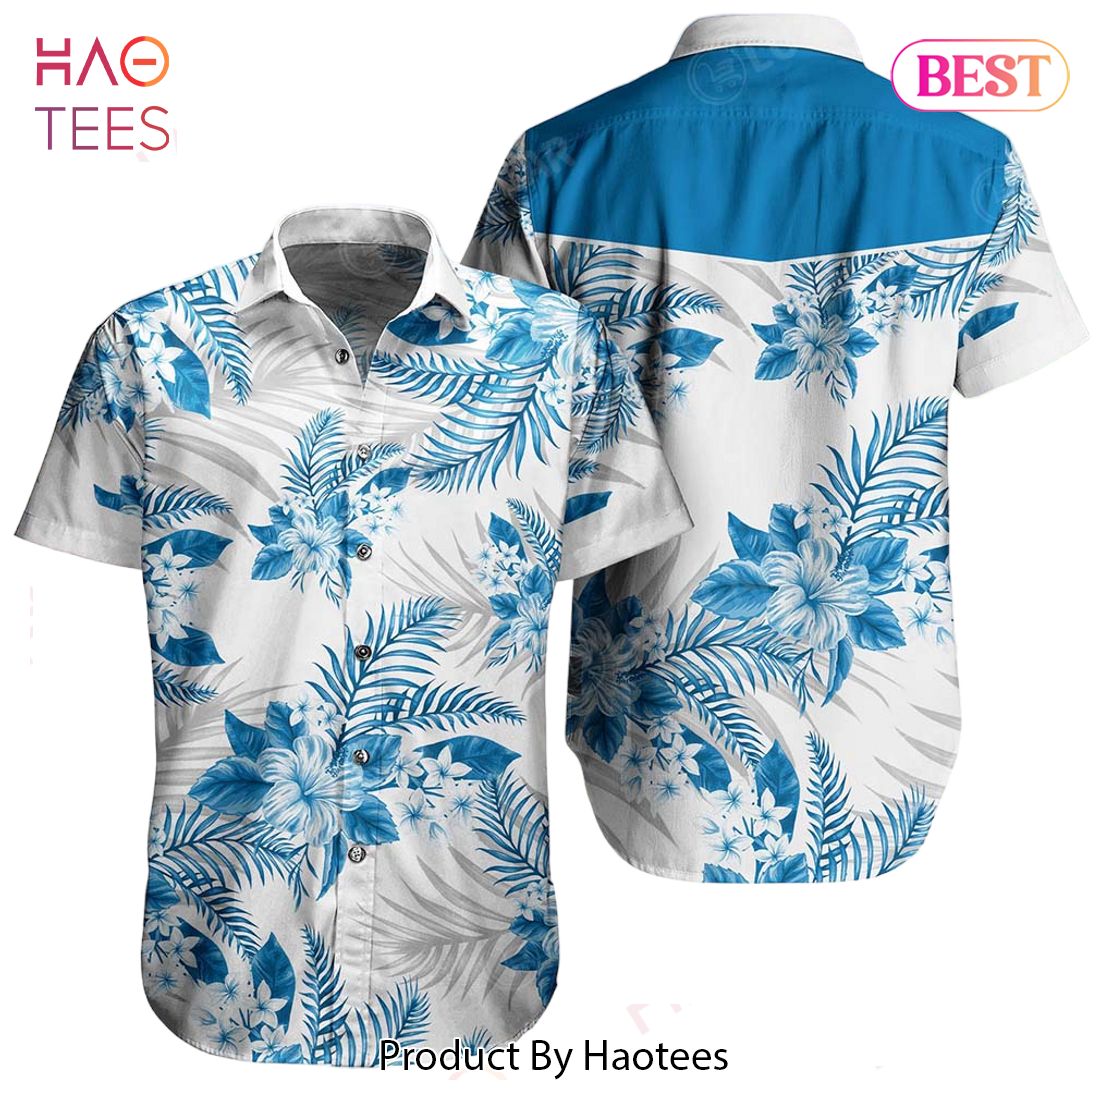 HOT TREND Detroit Lions NFL Hawaiian Shirt Tropical Pattern Graphic This Summer For Sports Enthusiast